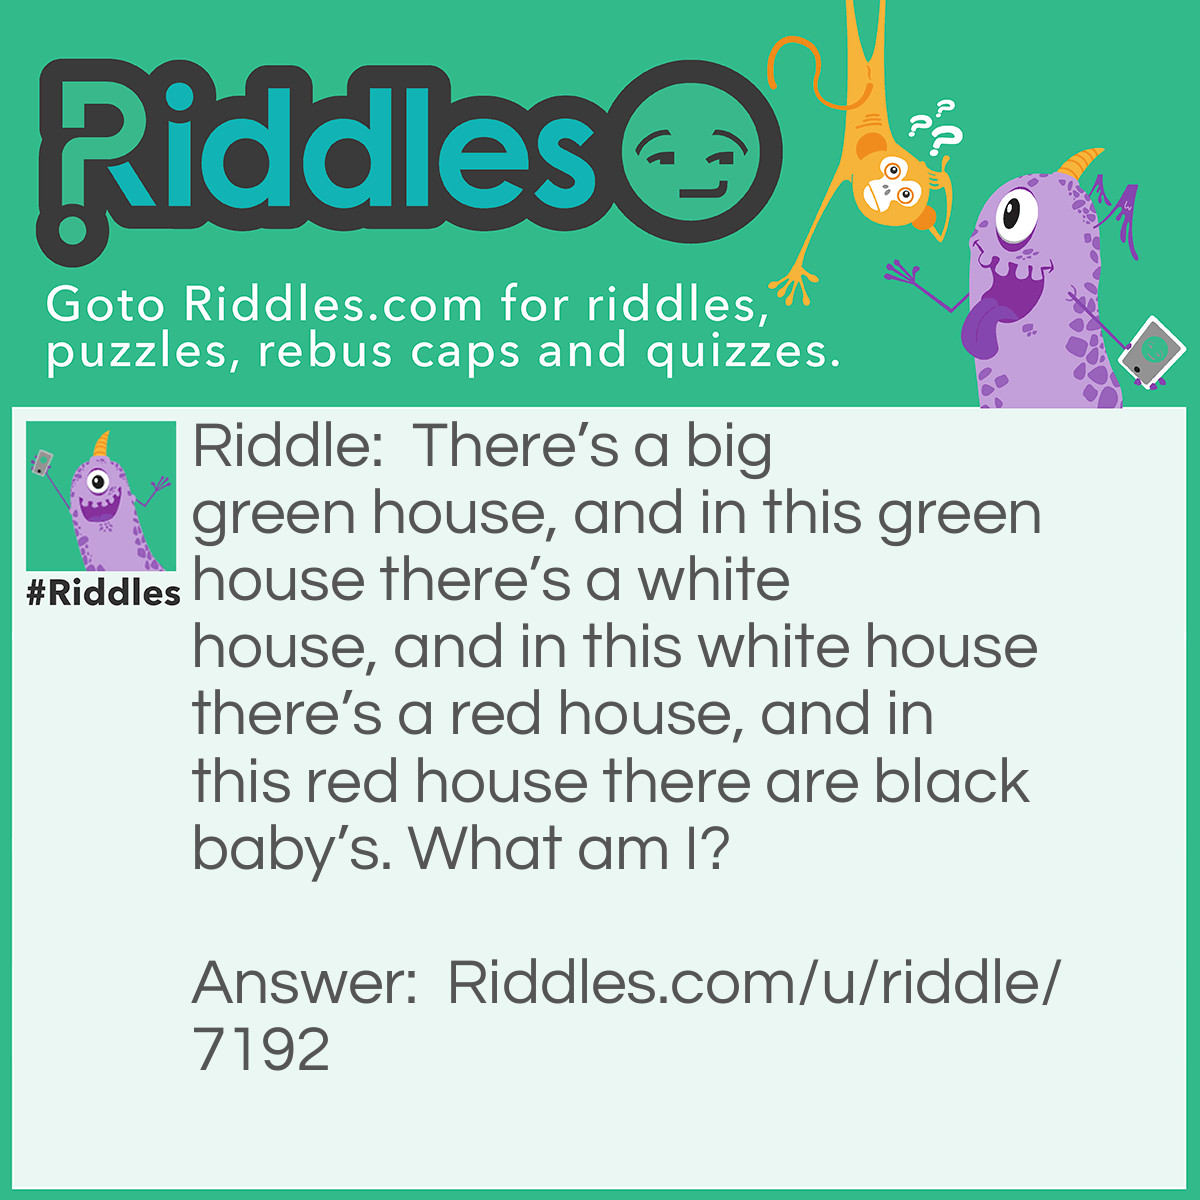 Riddle: There's a big green house, and in this green house there's a white house, and in this white house there's a red house, and in this red house there are black baby's. What am I? Answer: Watermelon.